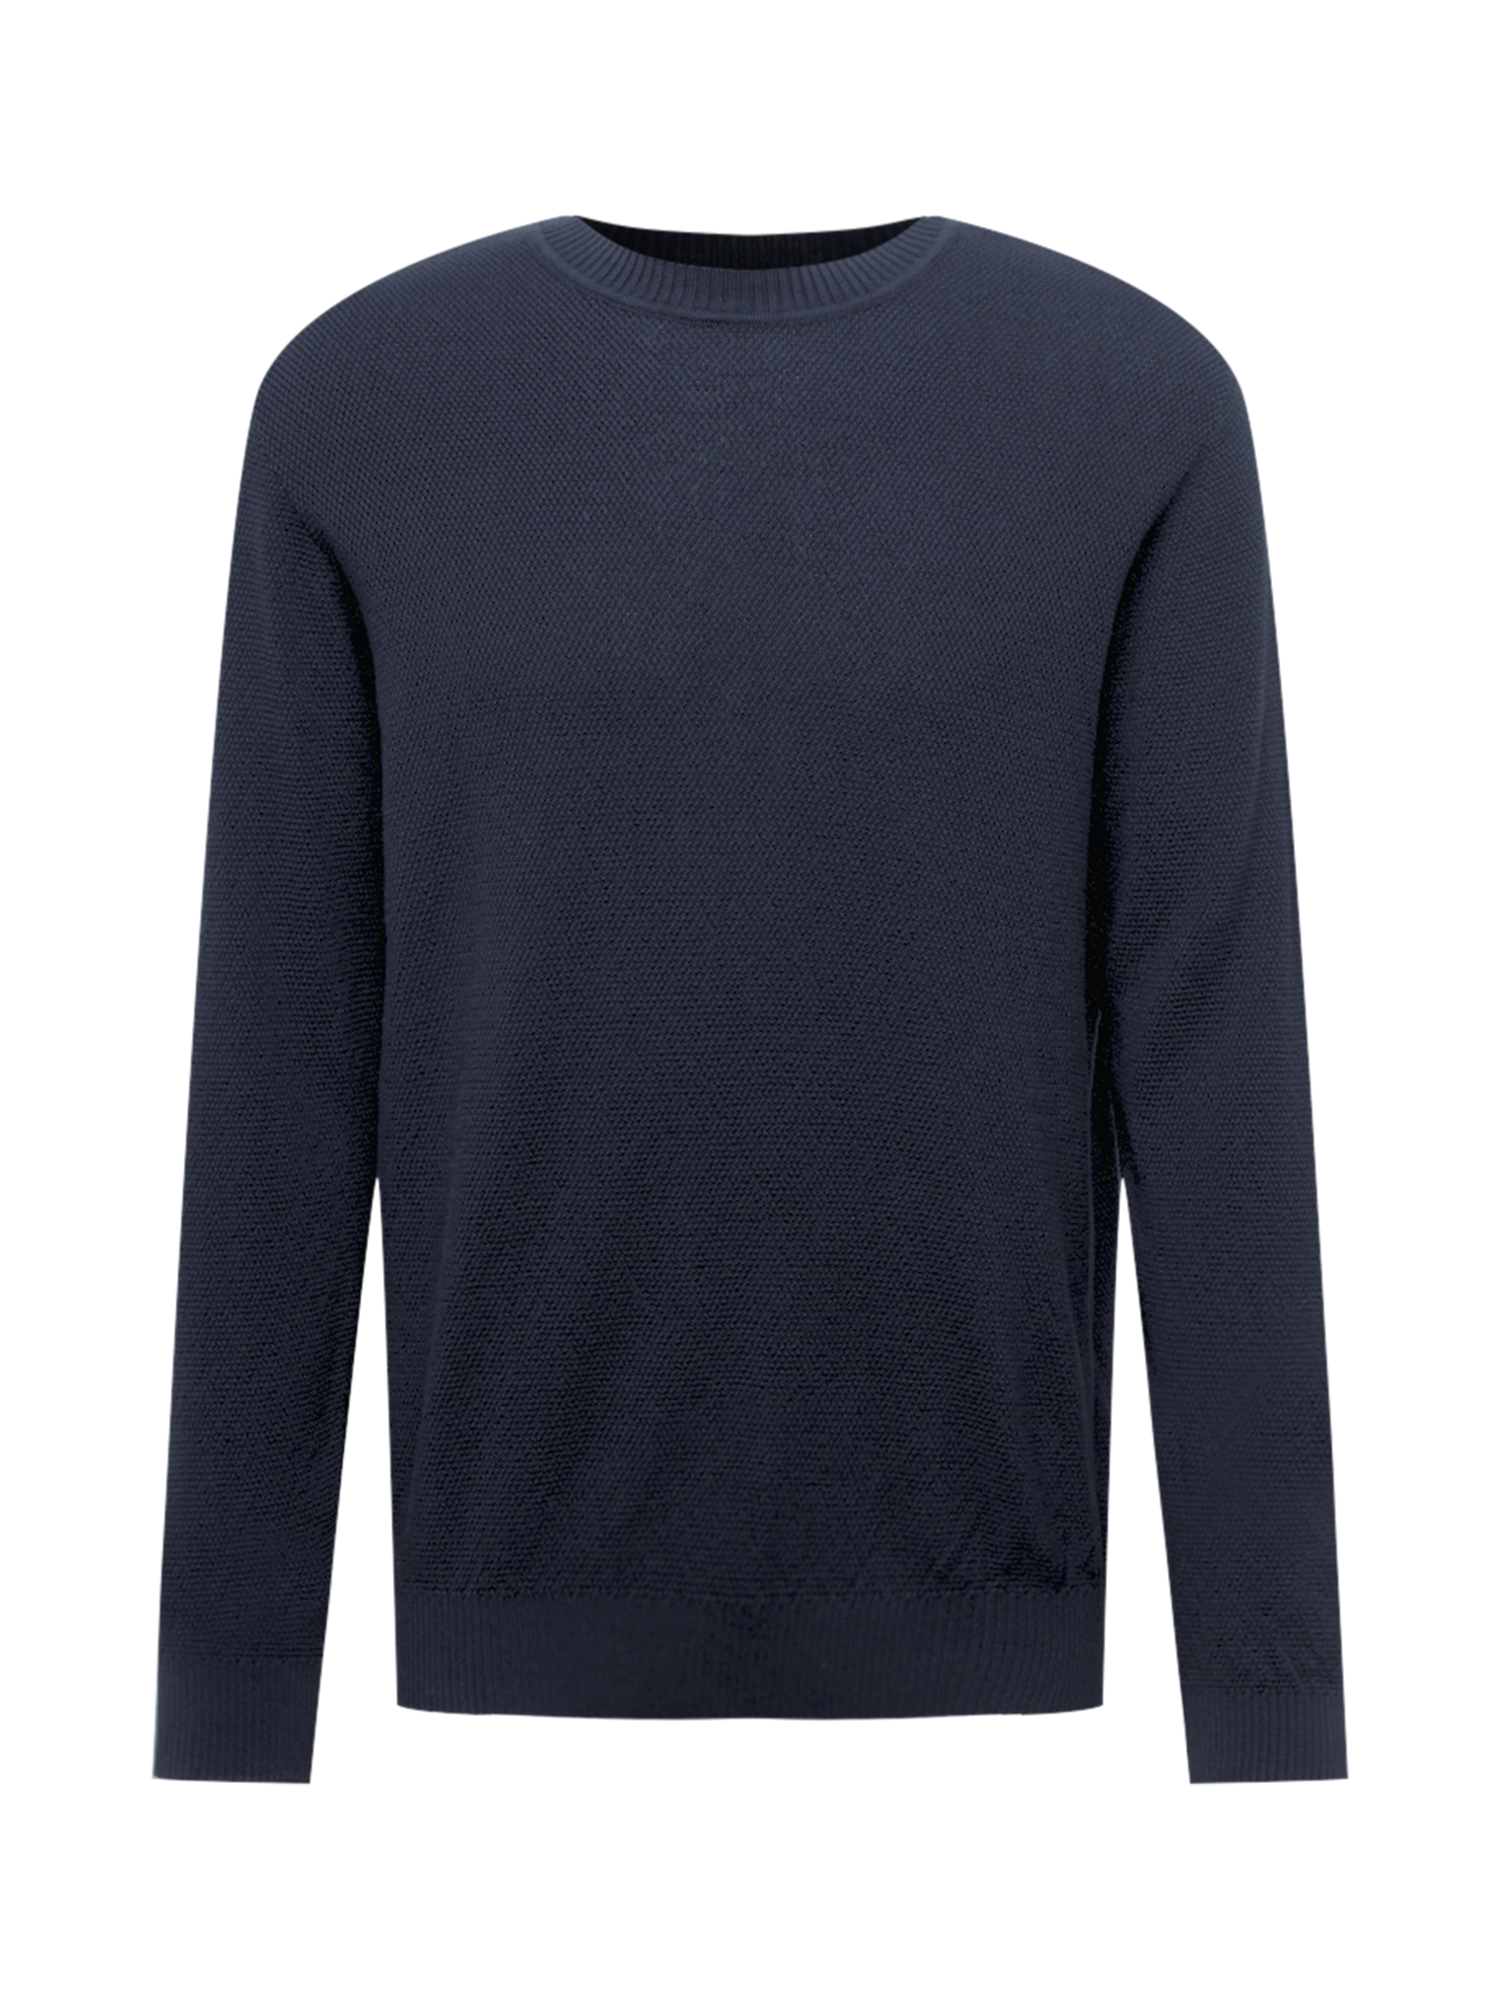 Pull-over Theo By Garment Makers en Bleu Marine 